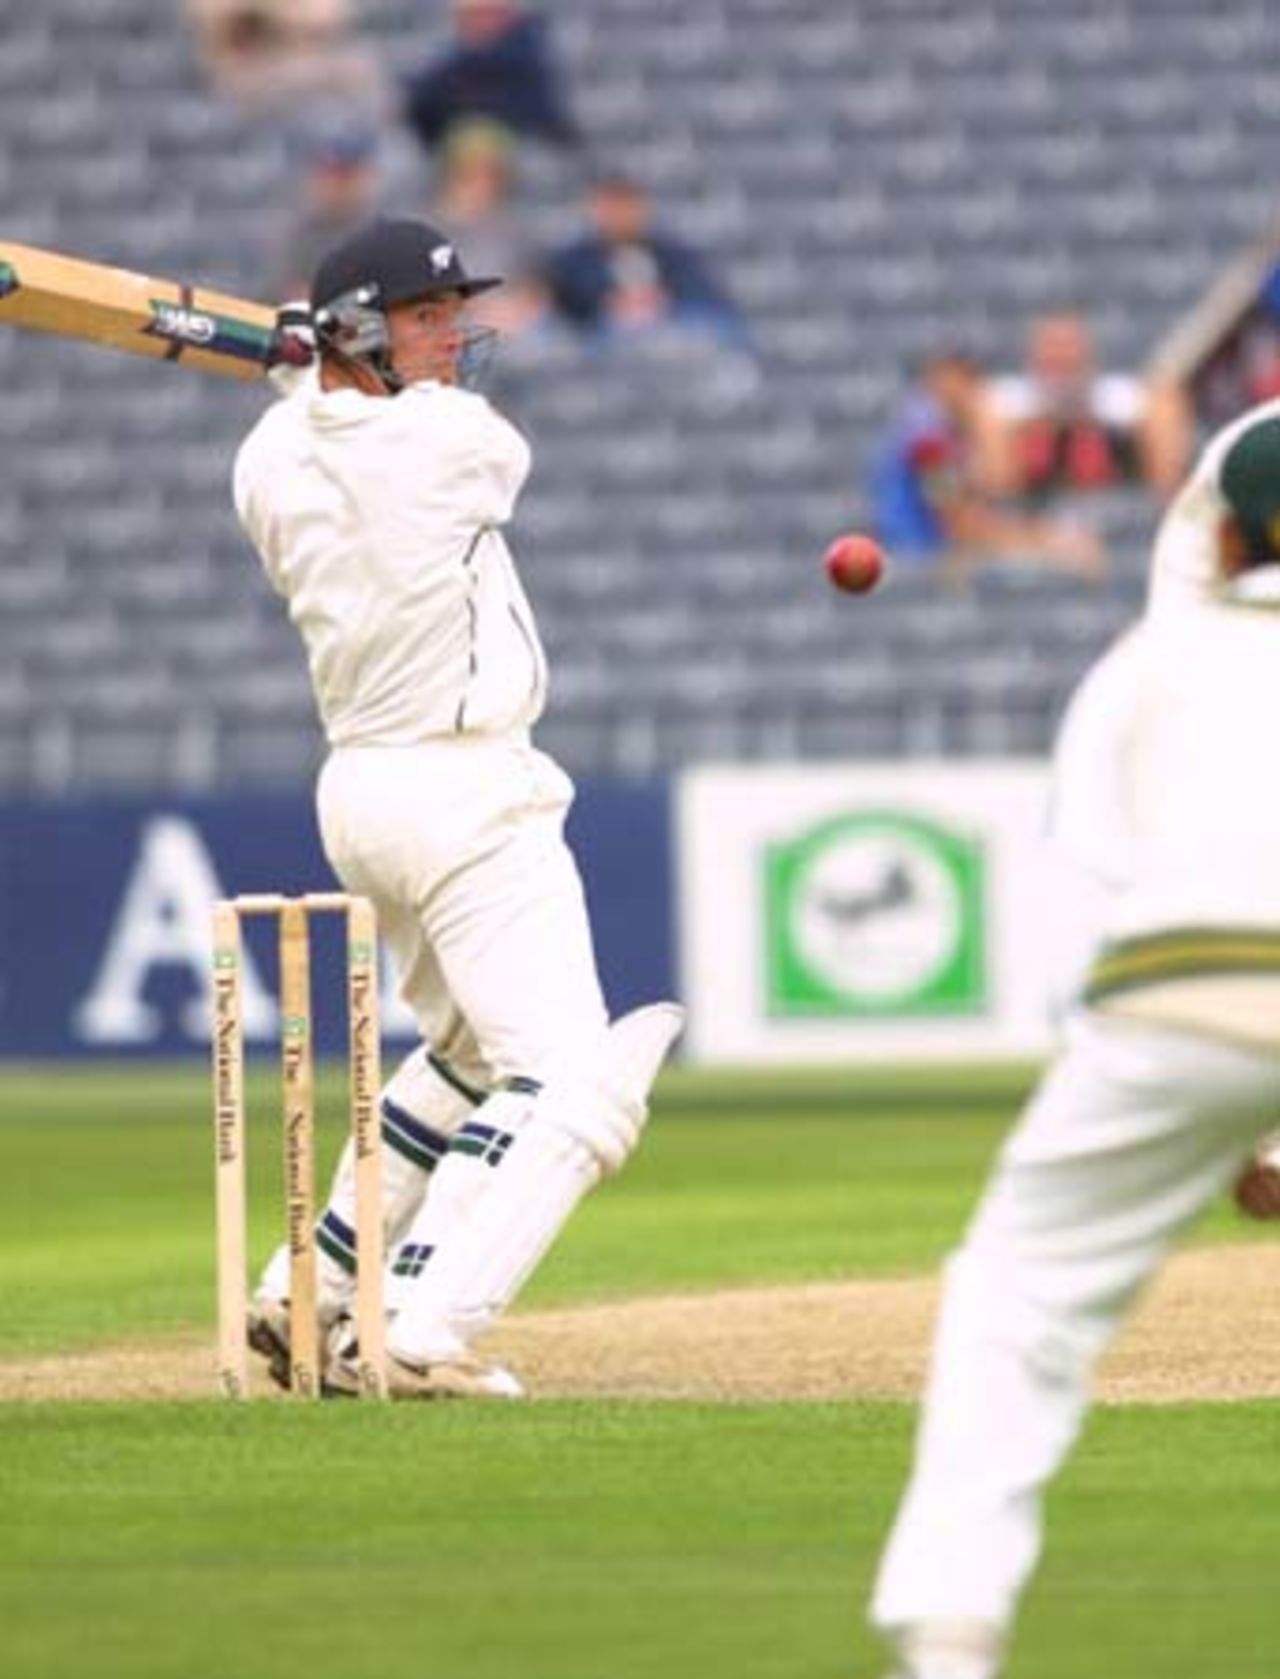 New Zealand batsman Craig McMillan unsuccessfully attempts to cut a ball in his first innings to be dismissed by Fazl-e-Akbar, caught by Younis Khan at second slip for 20. 2nd Test: New Zealand v Pakistan at Jade Stadium, Christchurch, 15-19 March 2001 (16 March 2001).